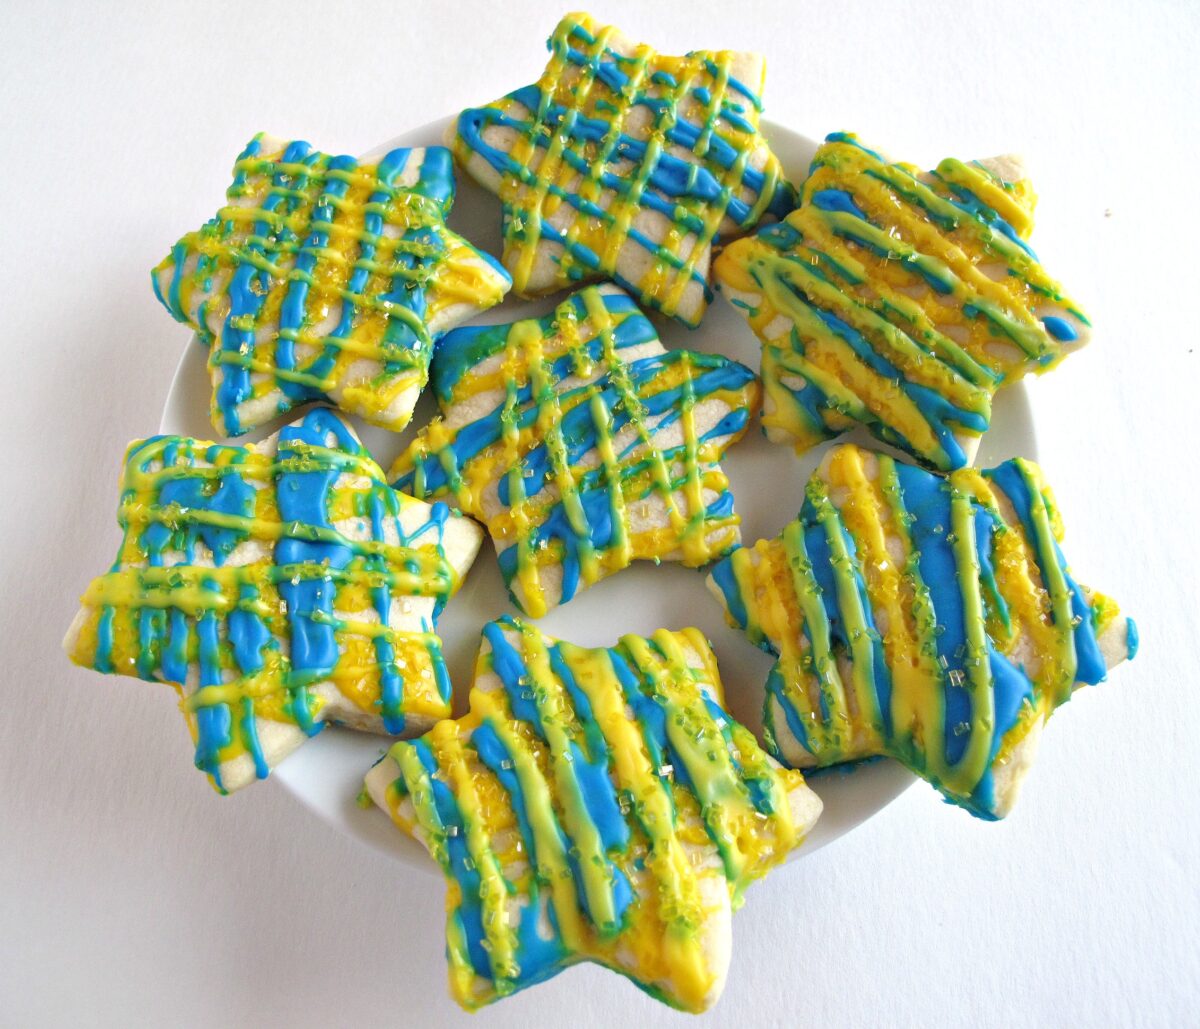 Star cut-out cookies with yellow and blue zigzag icing.